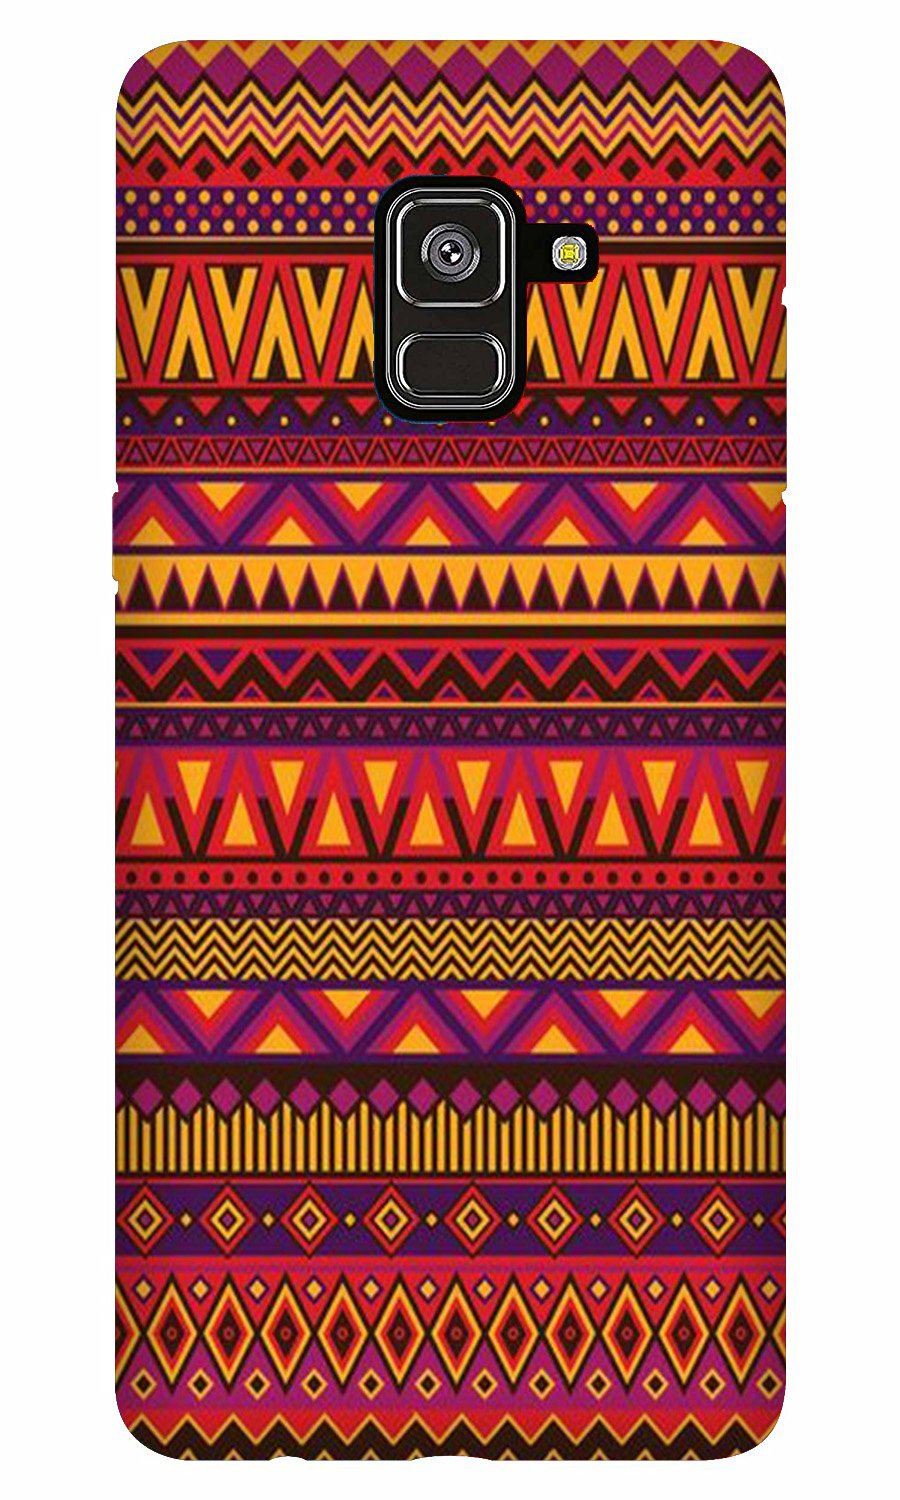 Zigzag line pattern2 Case for Galaxy A5 (2018)